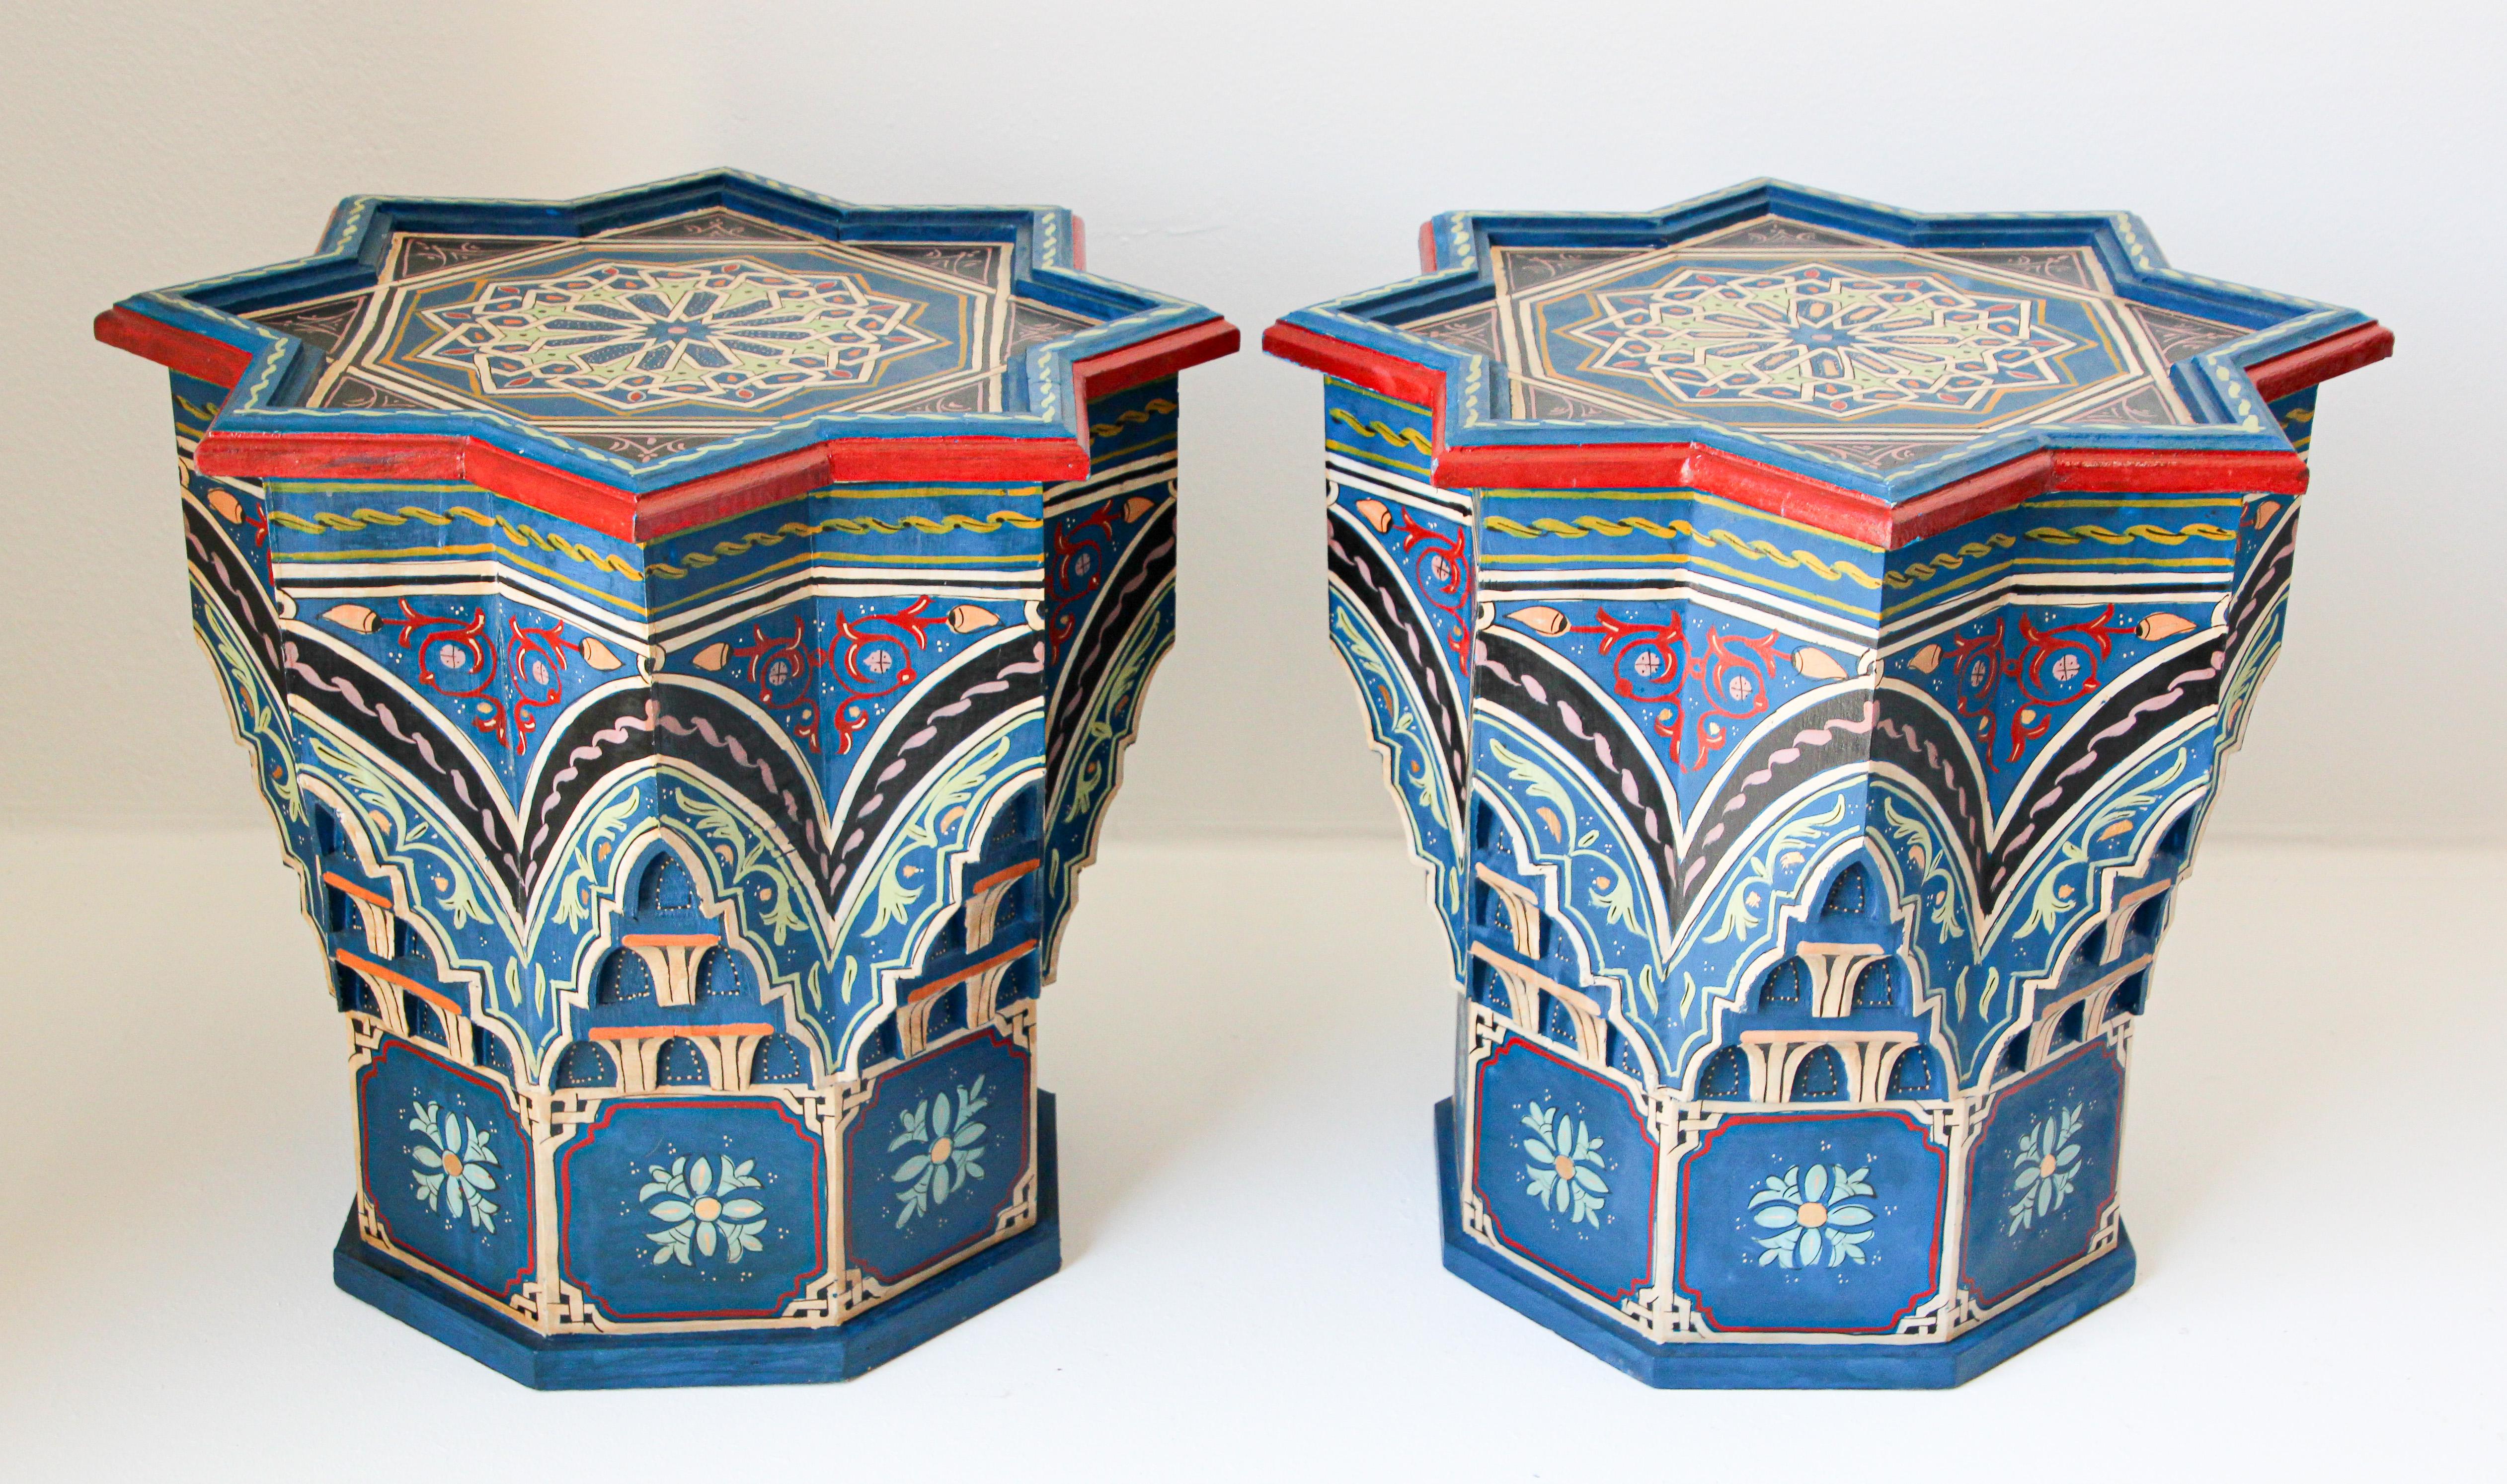 Pair of Moroccan colorful blue hand painted and carved side occasional table with Moorish Islamic designs.
Pedestal tables in royal blue background with multicolored floral and geometric designs.
Very decorative fine artwork on a star shape